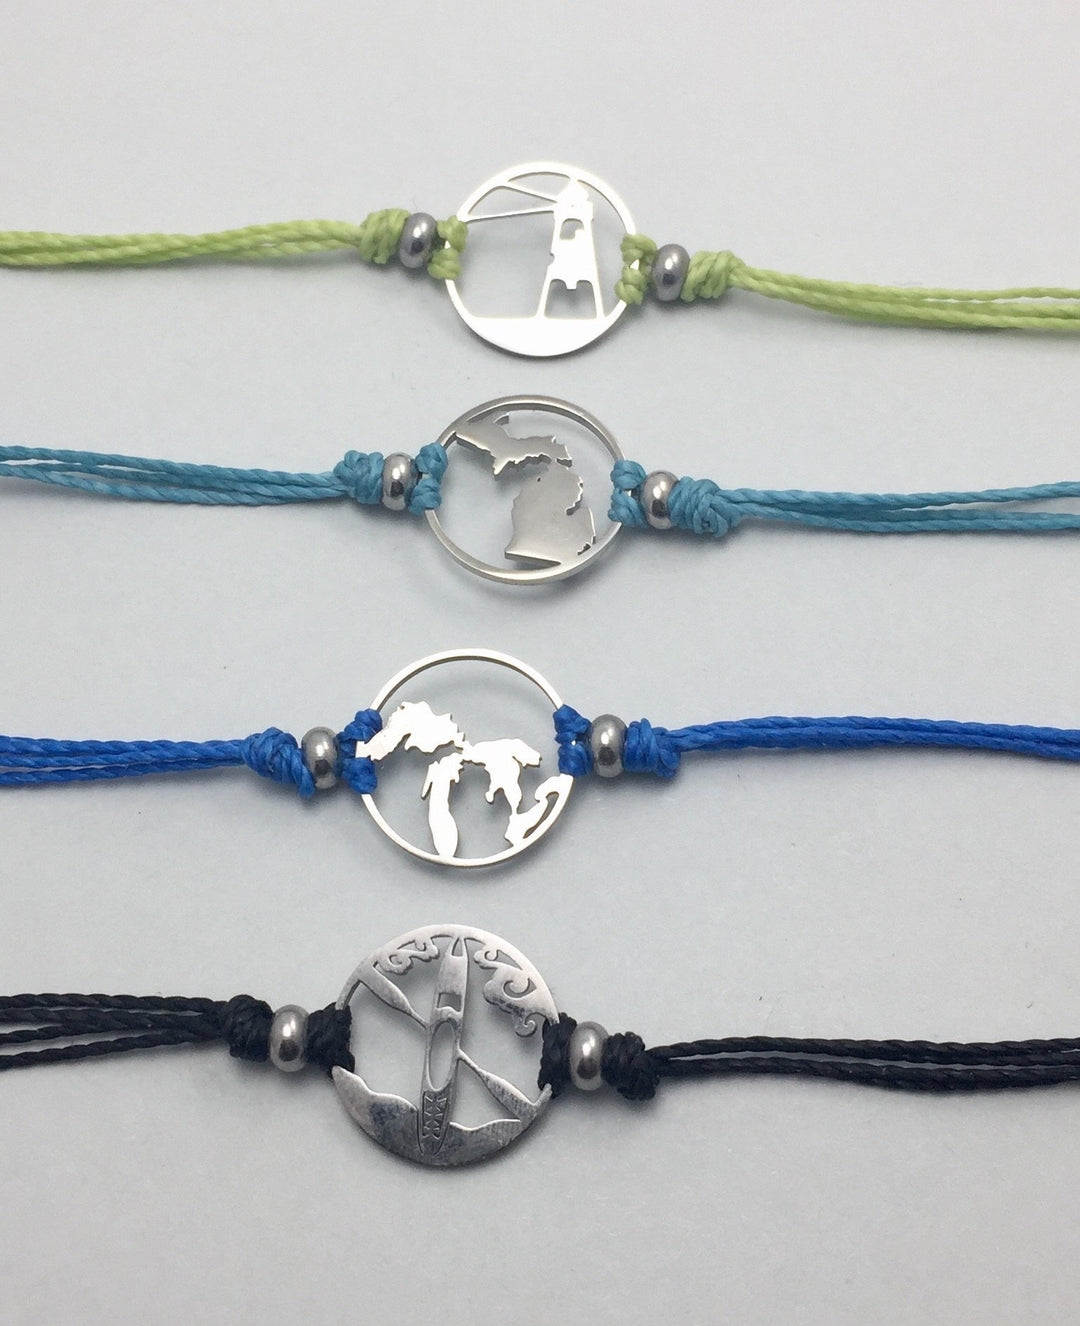 Wolf Pack Pull Cord Anklet - Be Inspired UP